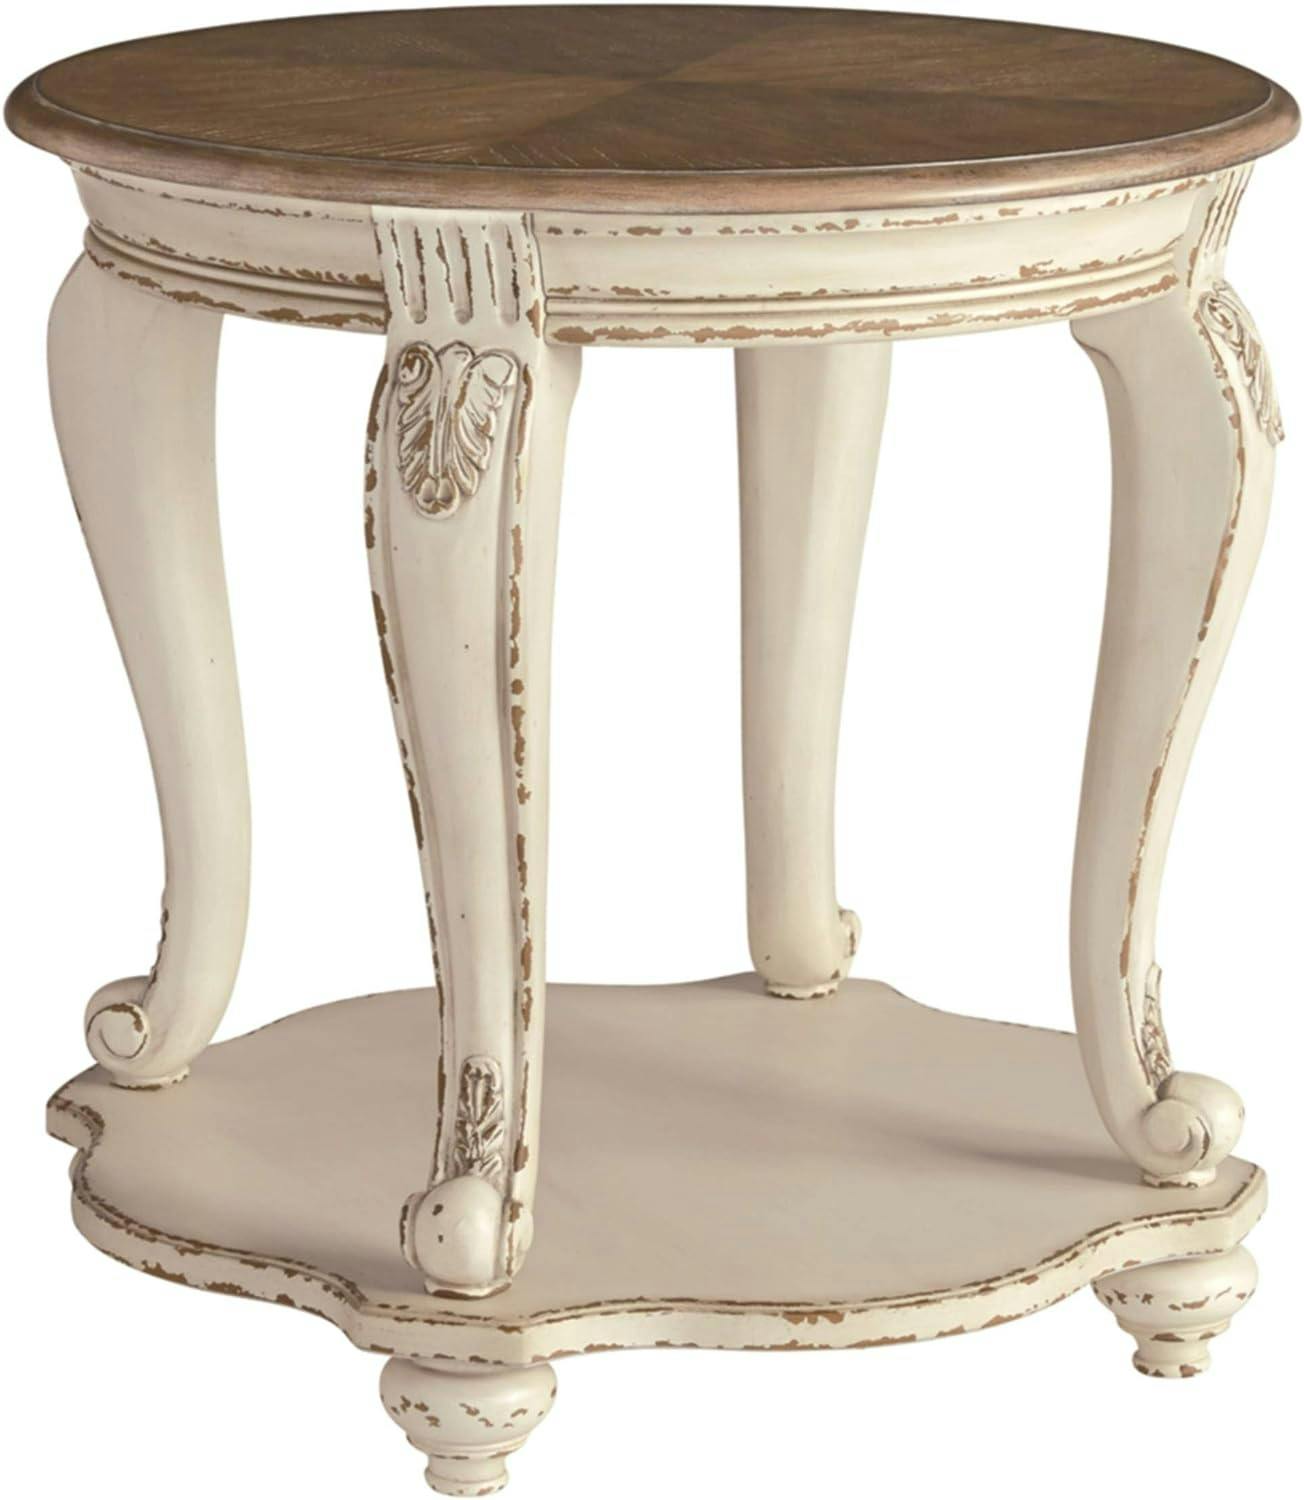 Antiqued Two-Tone Mirrored Storage Round End Table